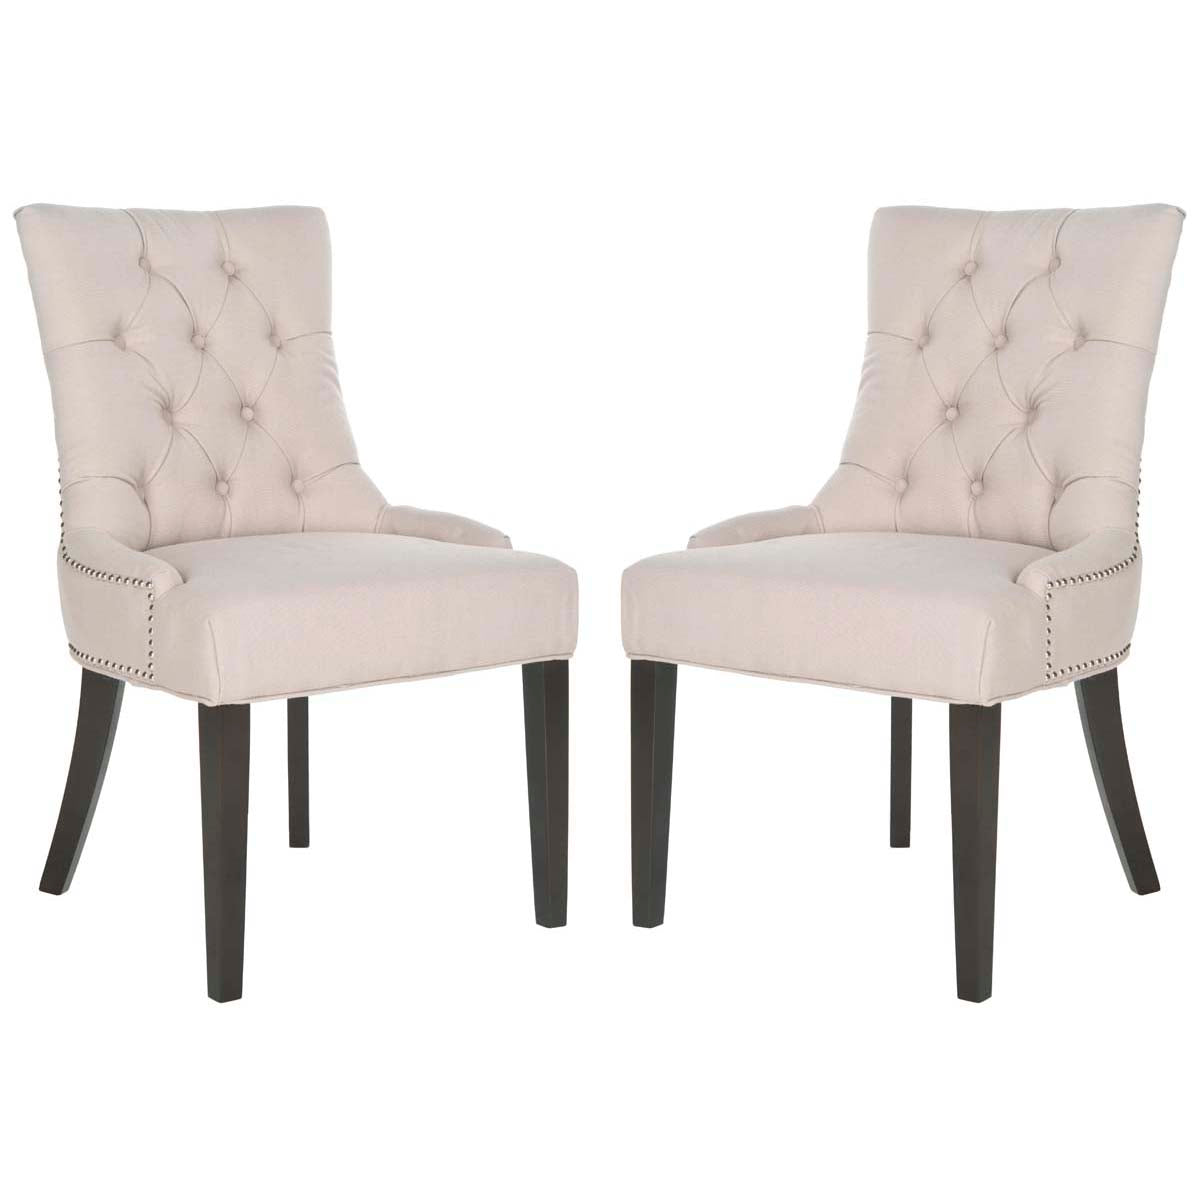 Safavieh Harlow 19''H Tufted Ring Chair (Set Of 2)   Silver Nail Heads , MCR4716